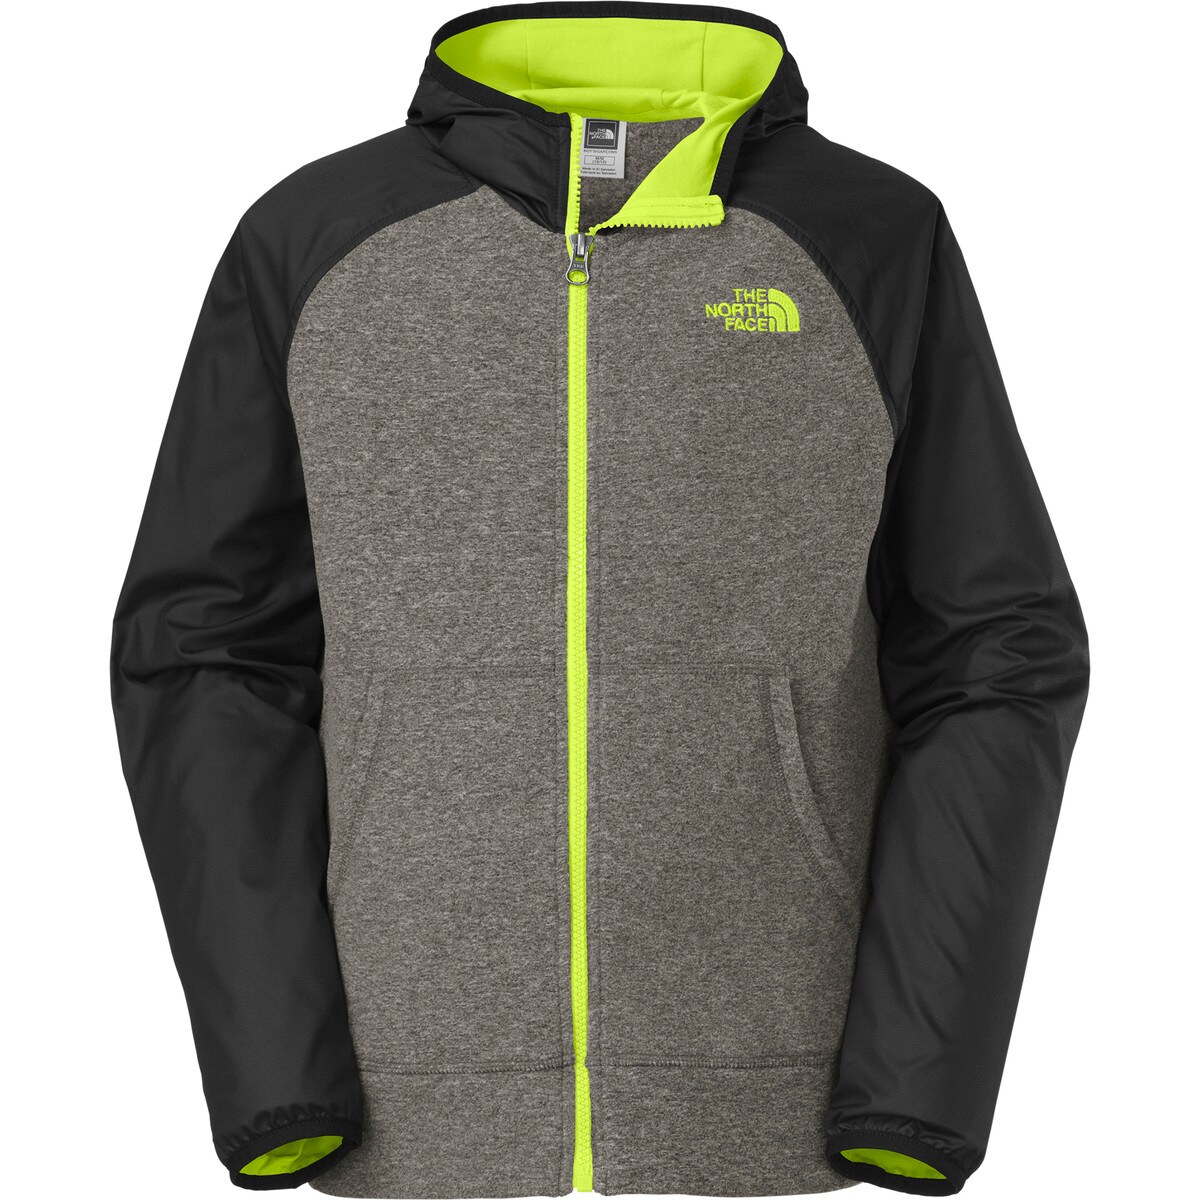 The North Face Glacier Track Full Zip Hoodie - Trailspace.com